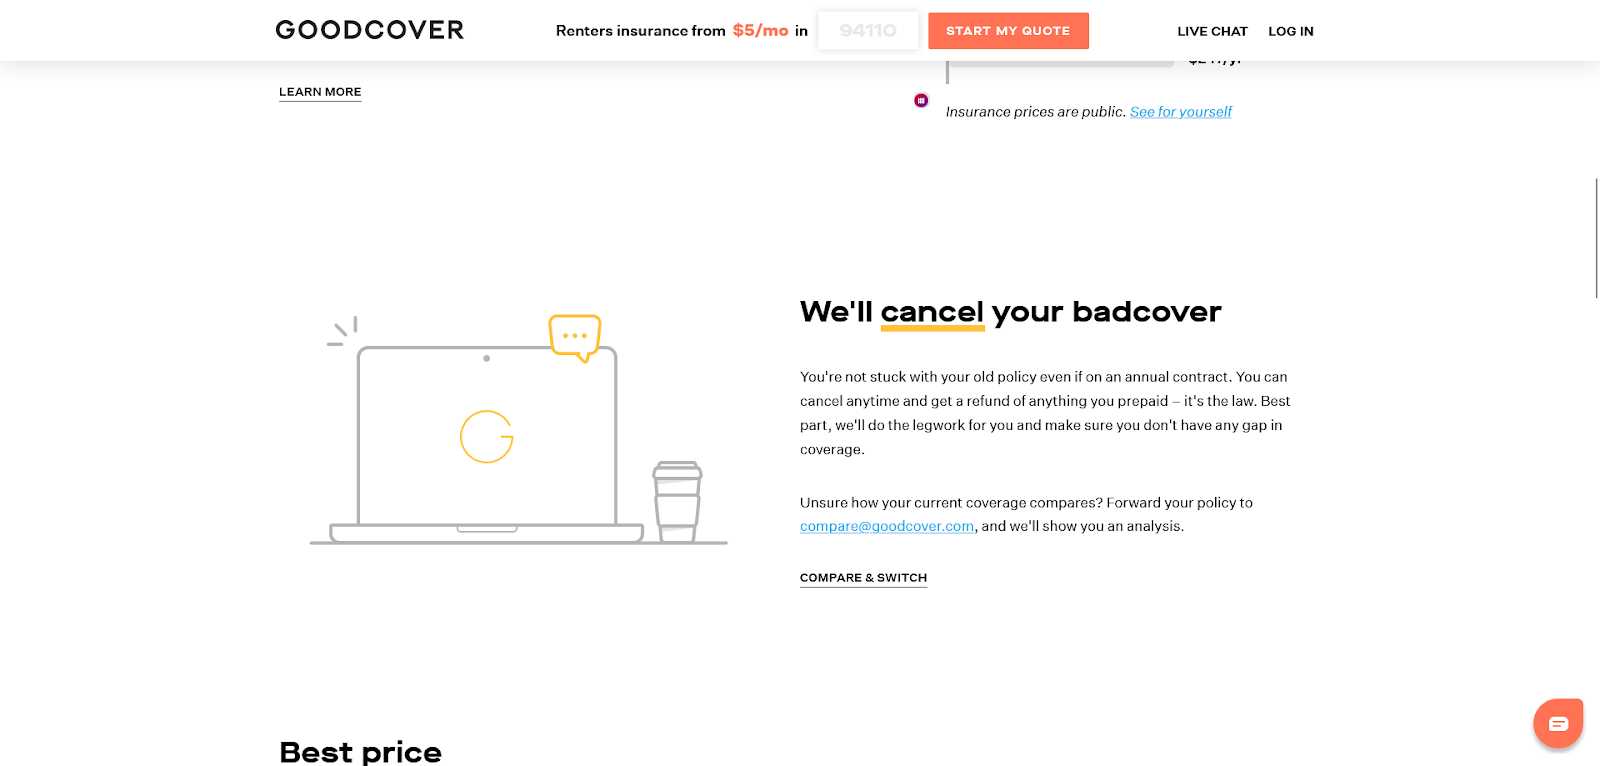 Image of Goodcover’s Offer to Cancel Your Bad Policy.